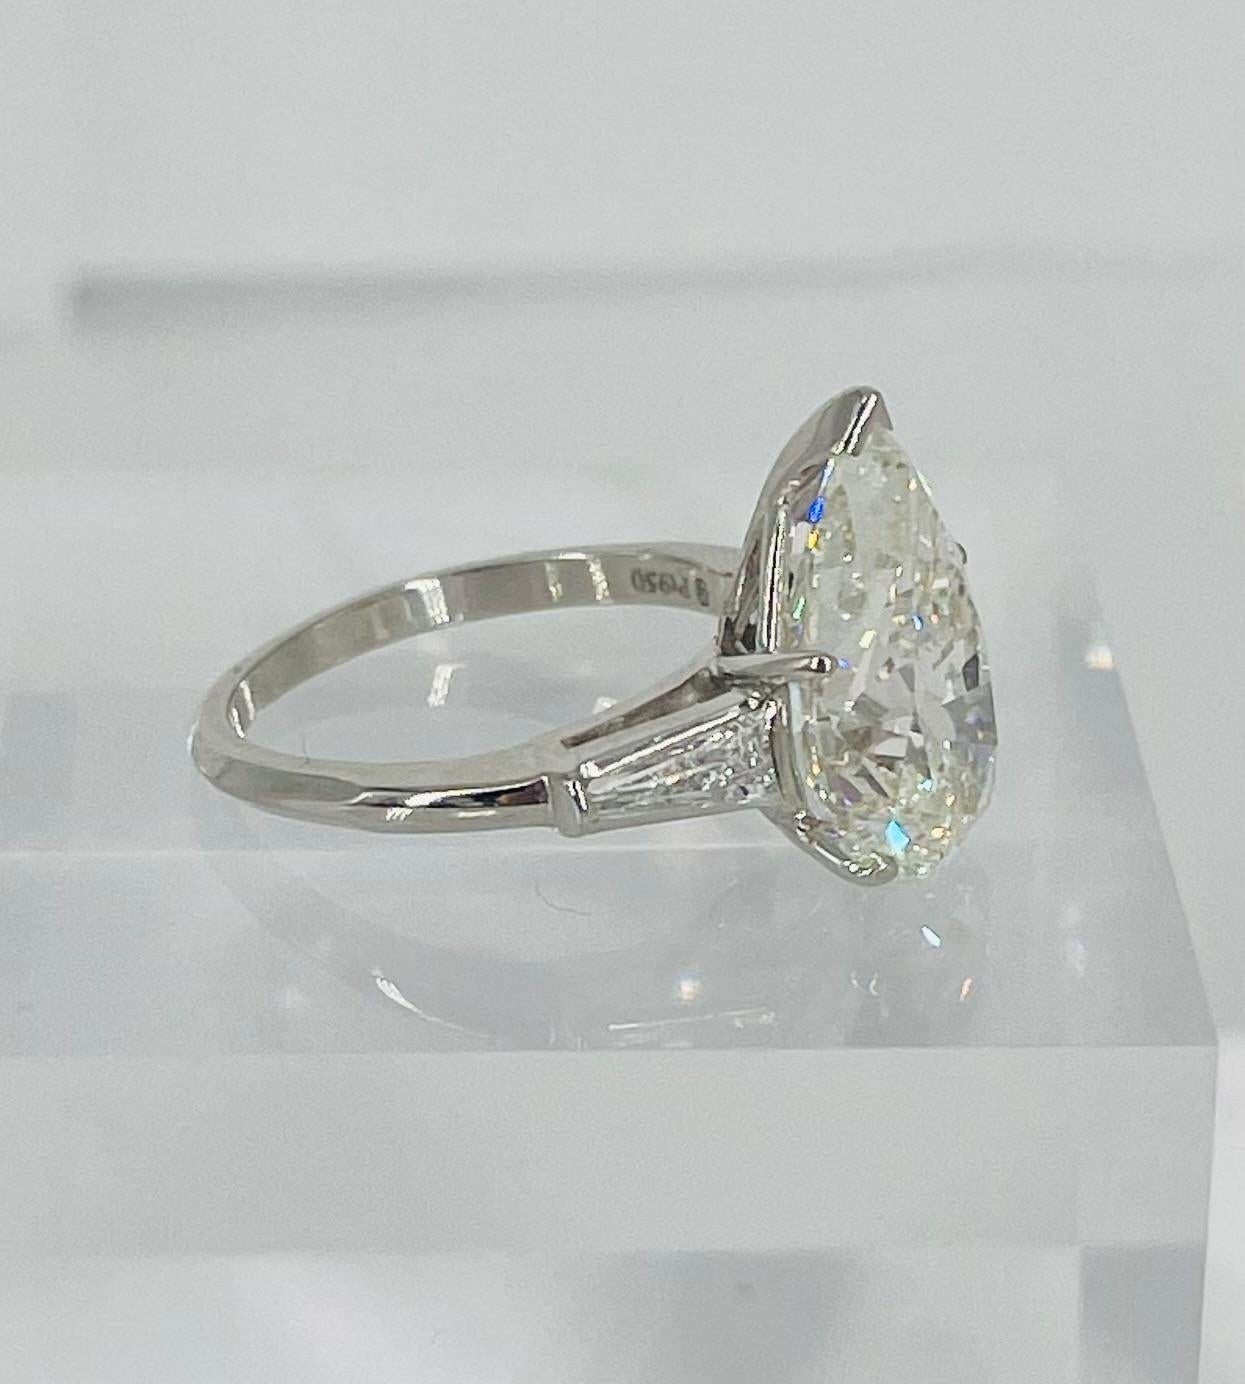 This classic three stone engagement ring by J. Birnbach features a stunning 5.52 GIA certified pear shape diamond. The diamond is K color and SI2 clarity, and has a beautifully elongated shape that is very flattering on the finger. The setting is